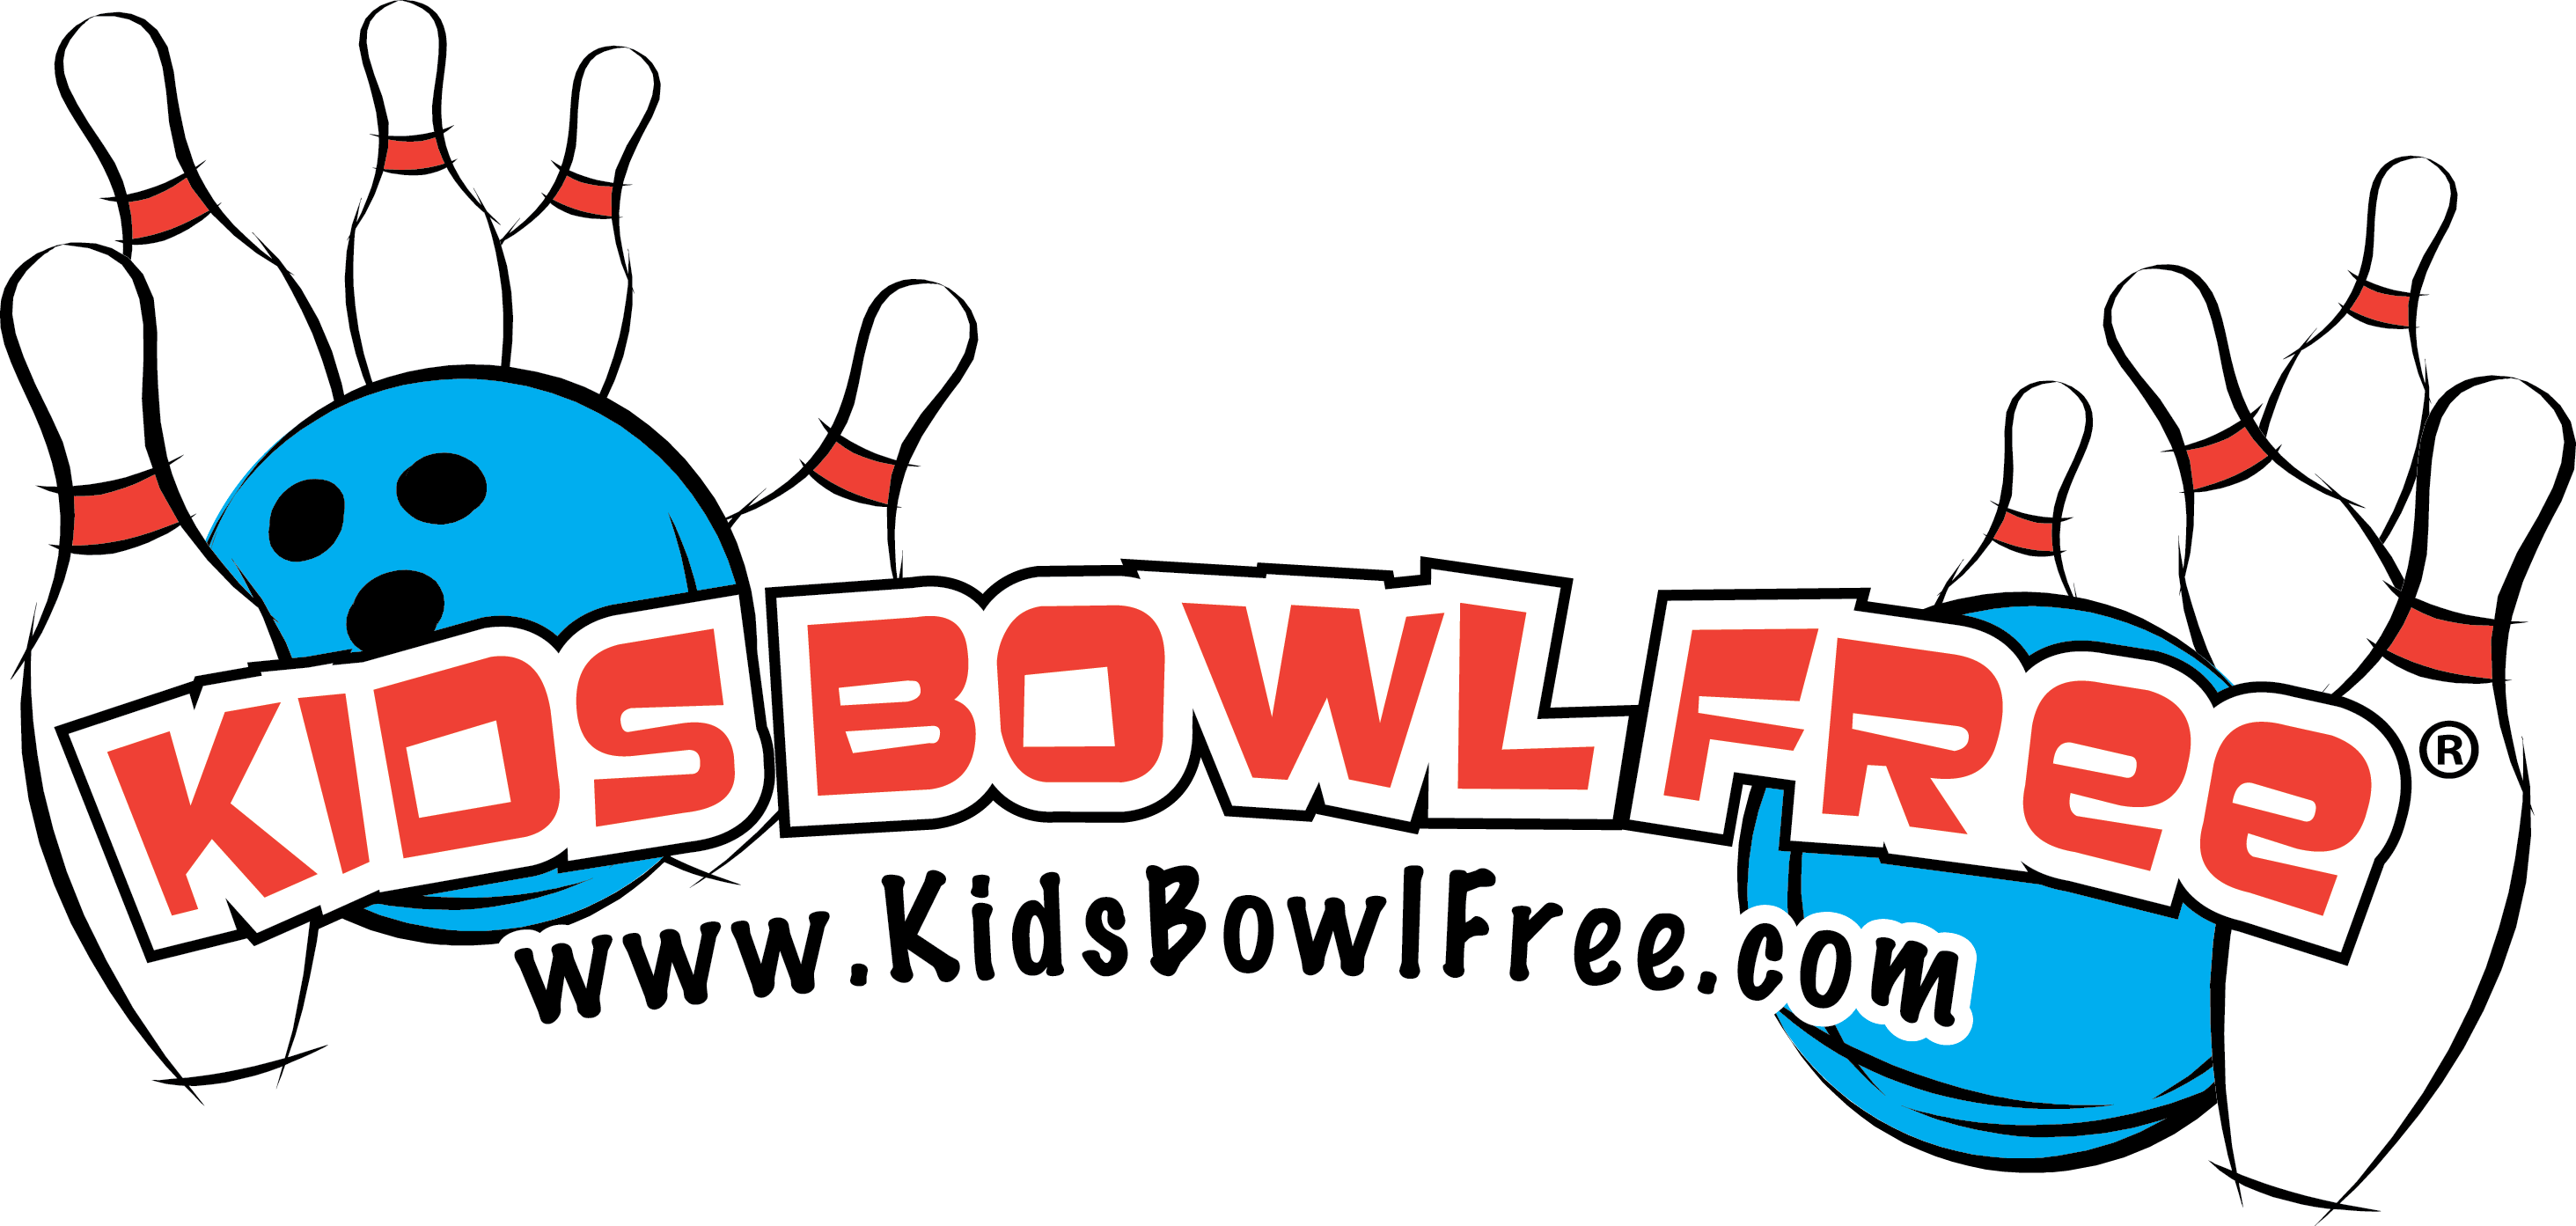 Hill Afb Is Participating In A Great Summer Program, - Kids Bowl For Free (2927x1393)